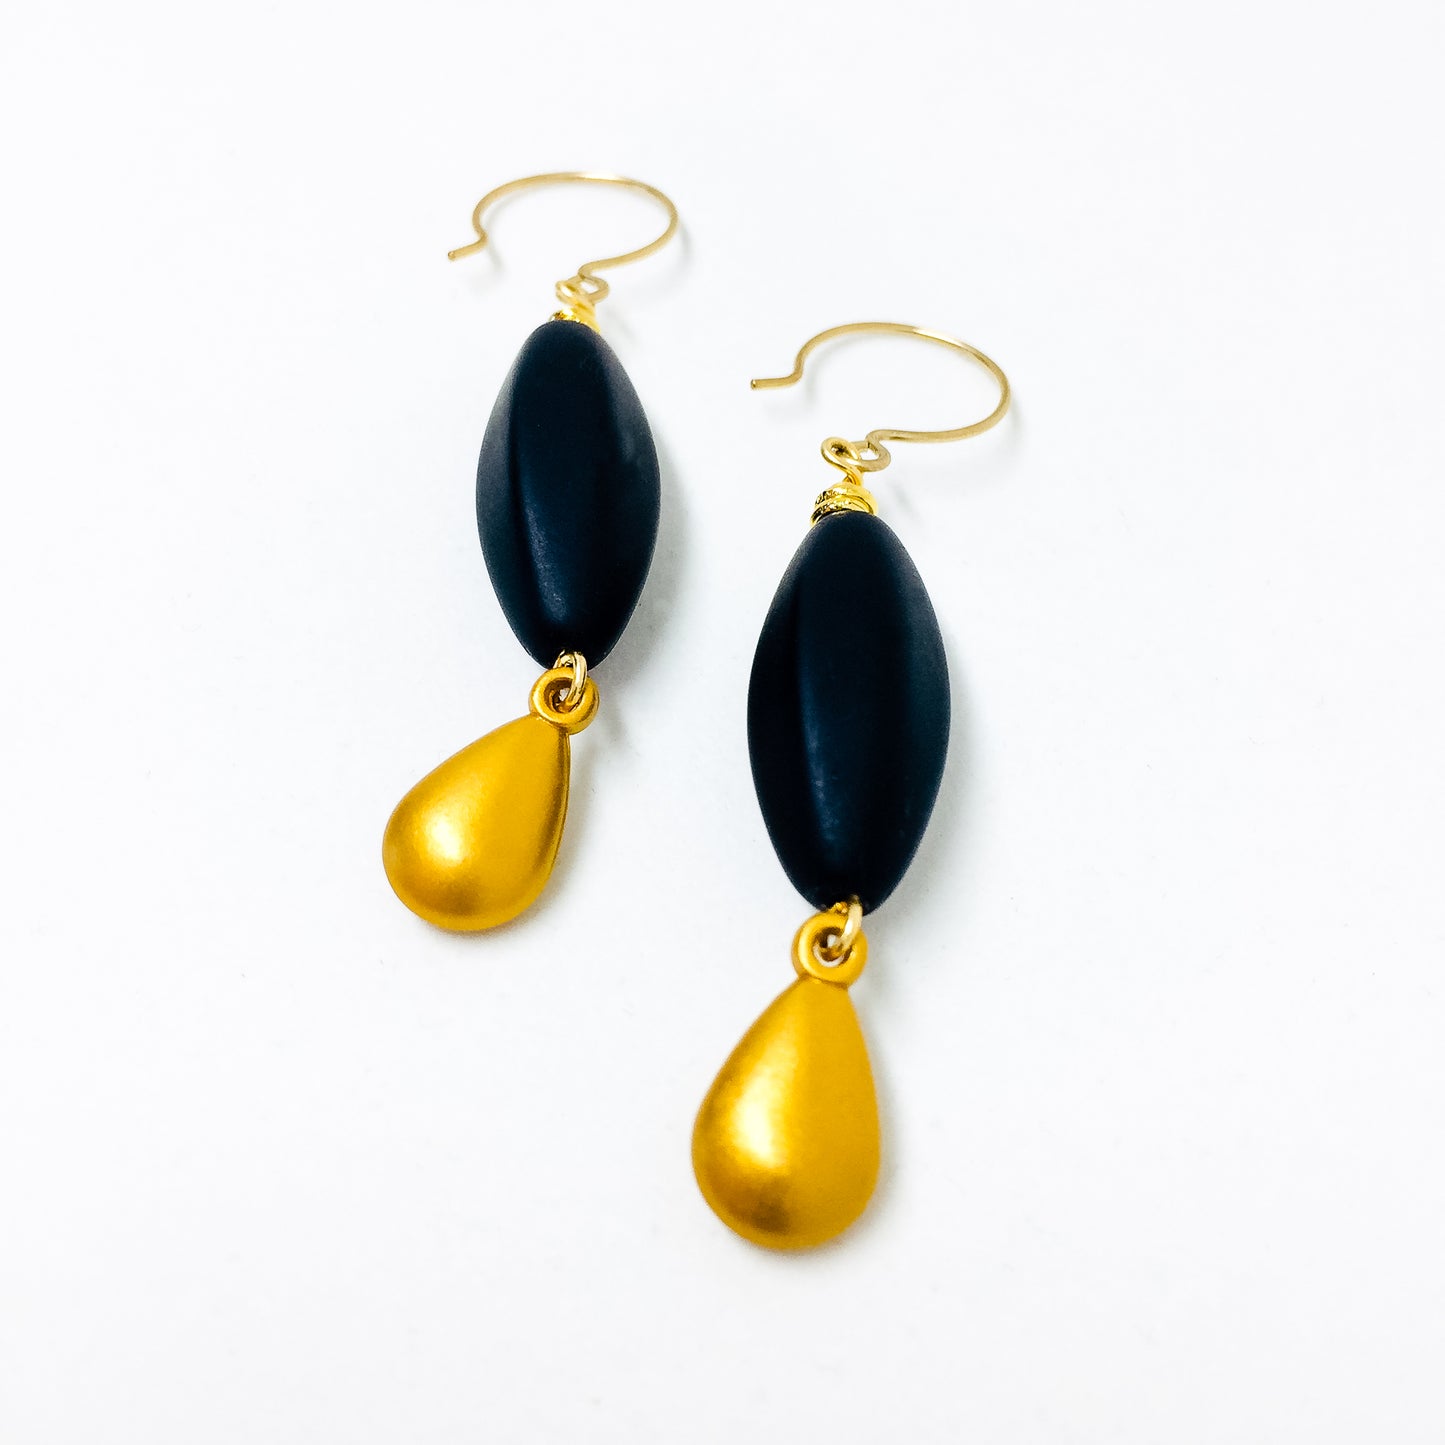 Black Frosted Czech glass bead drop earrings with gold charm